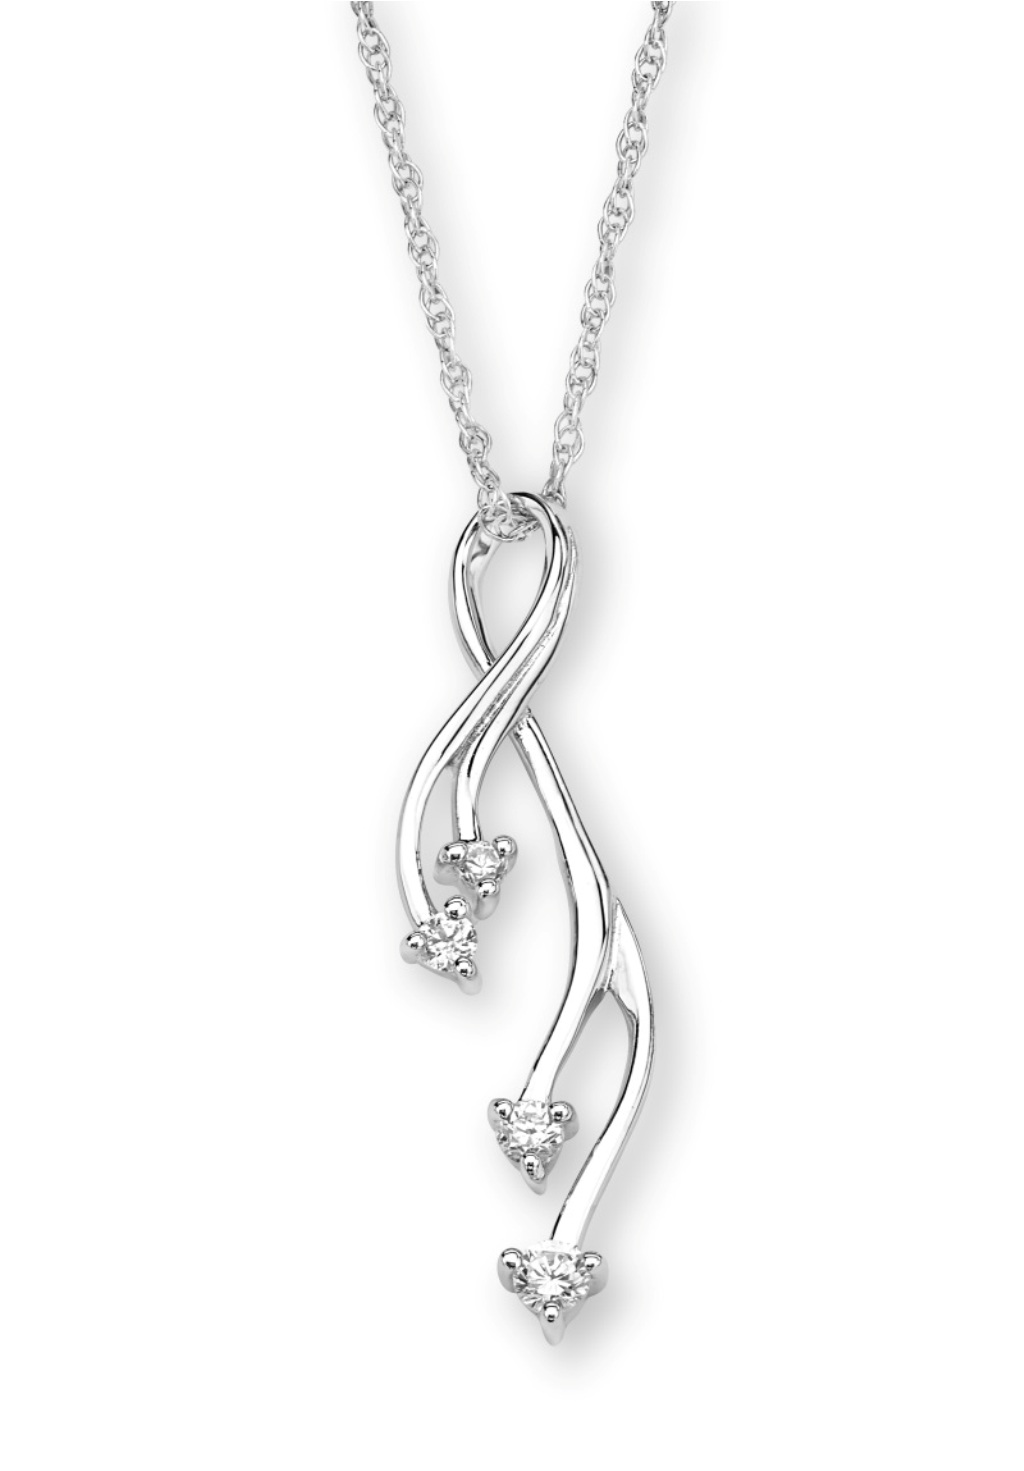  CZ Mirror Polished Swirl Pendant Necklace, Rhodium Plated Sterling Silver, 18